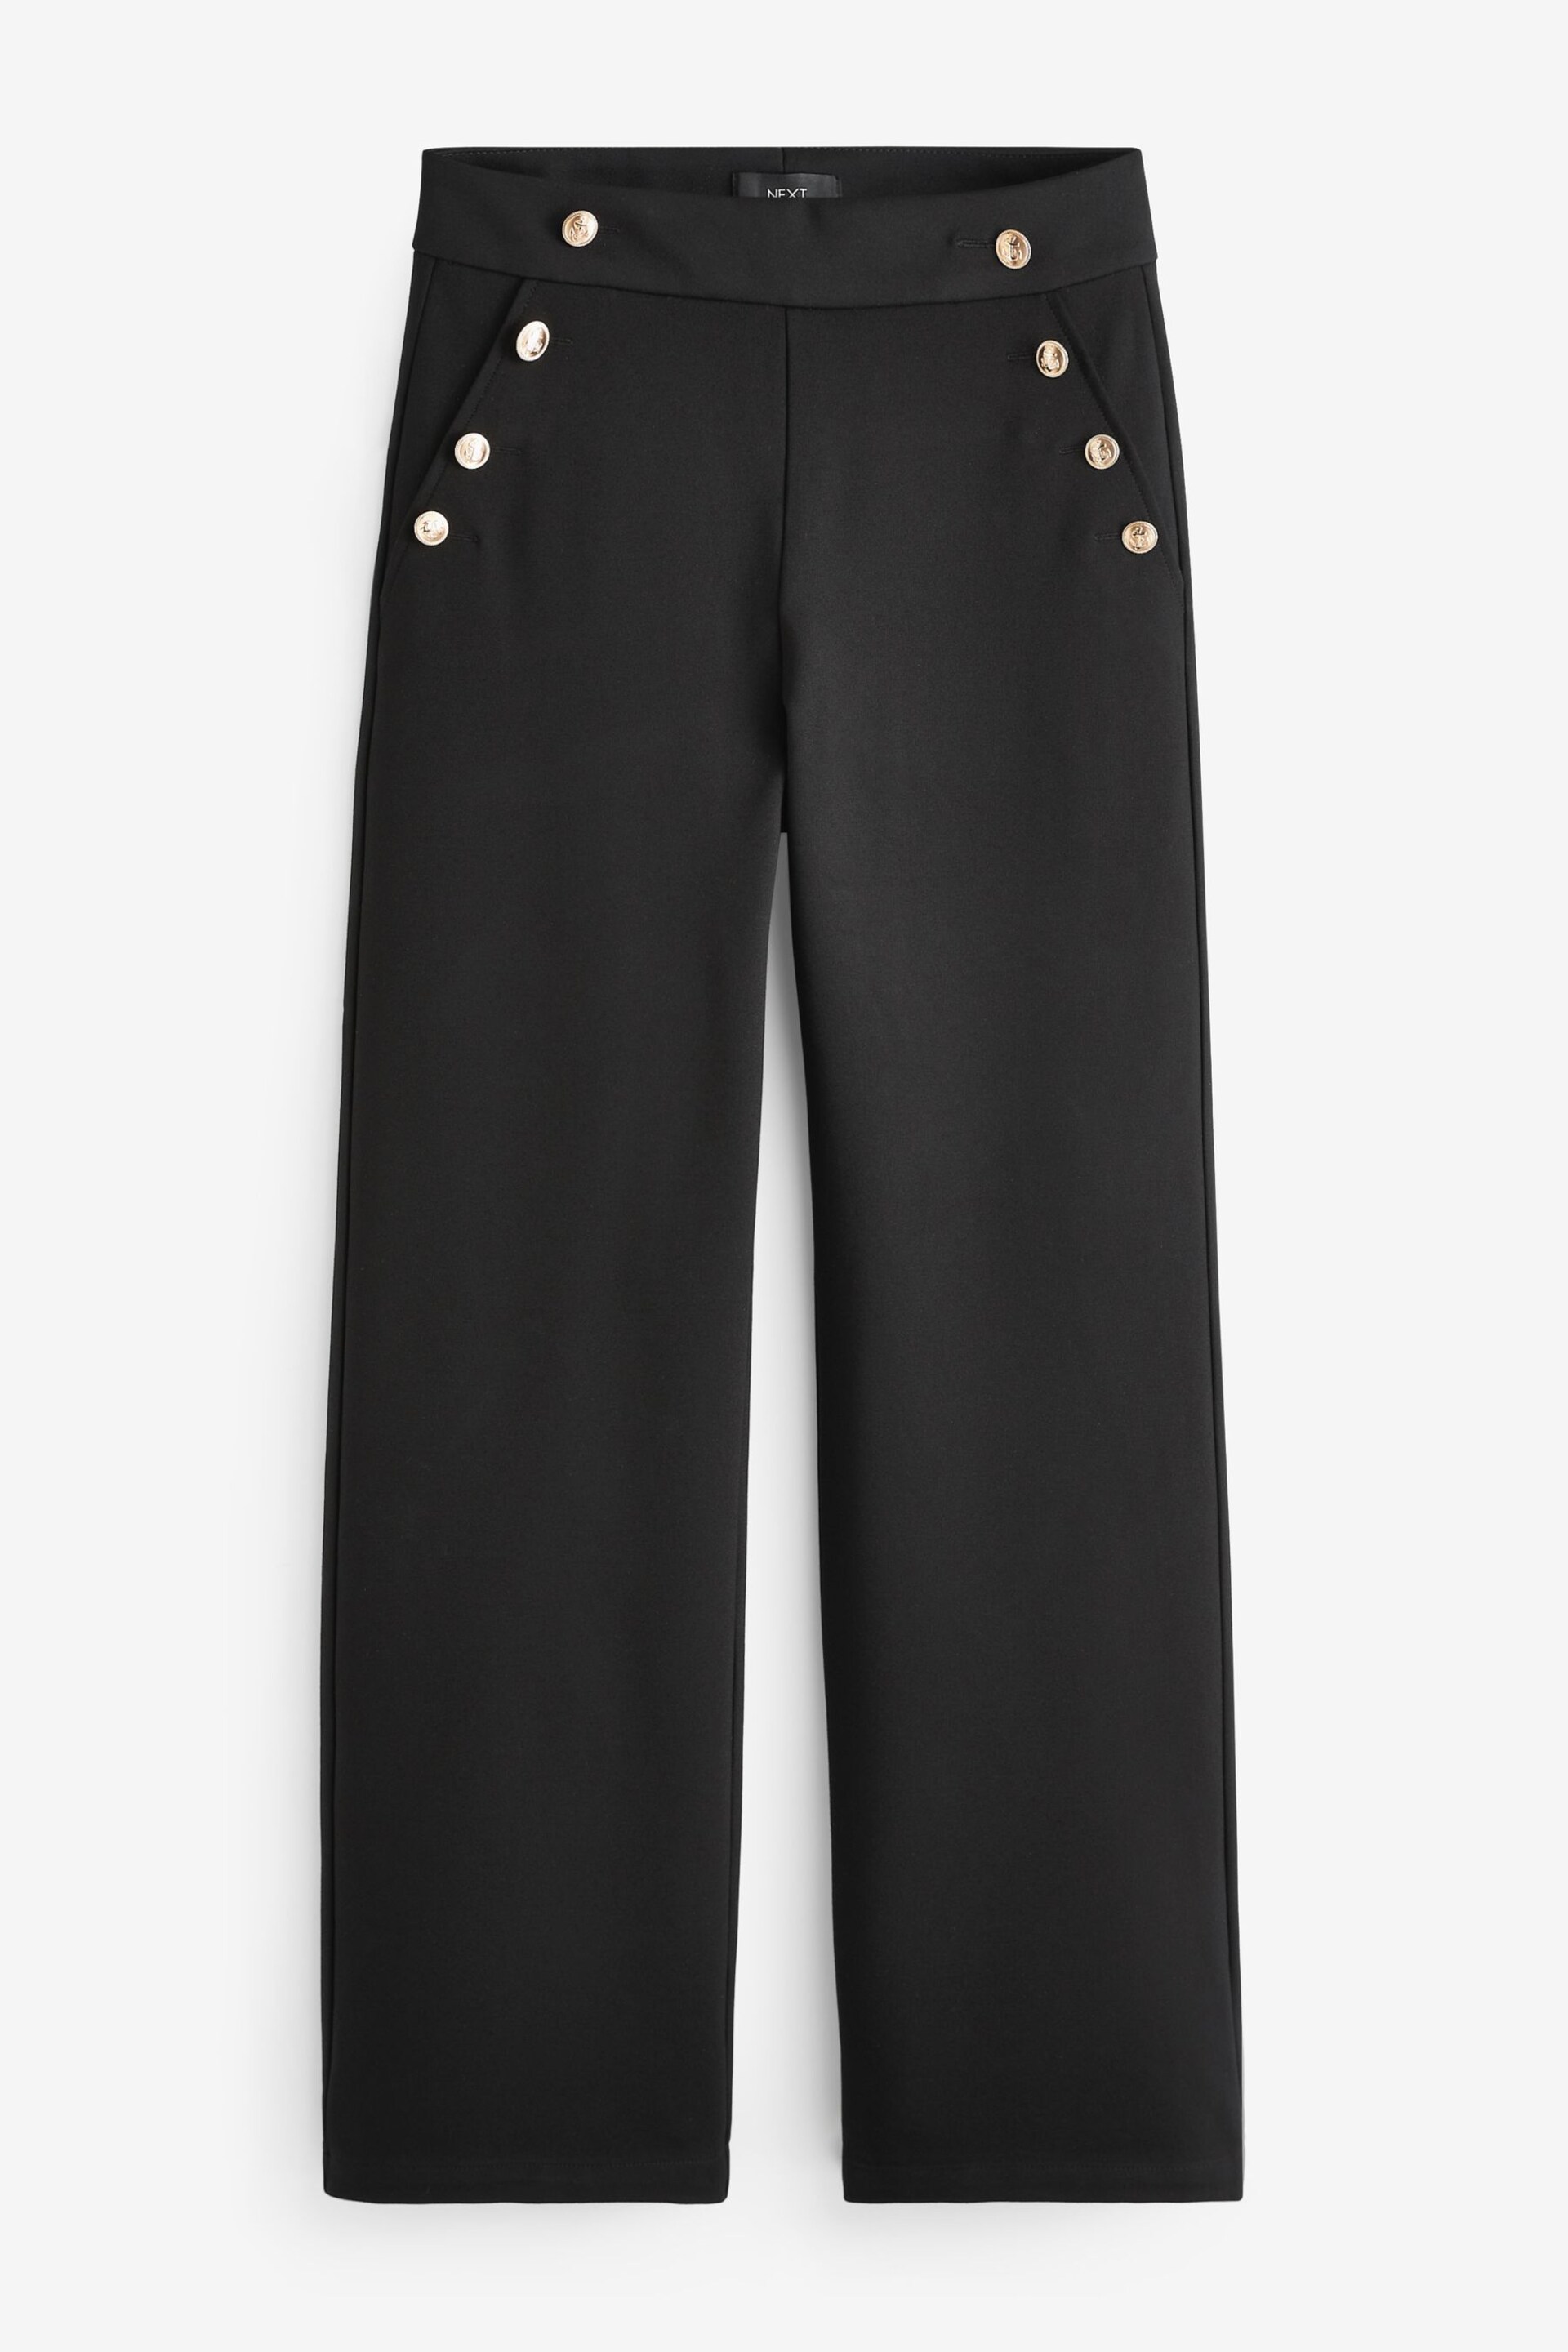 Black Ponte Button Wide Leg Trousers - Image 5 of 6